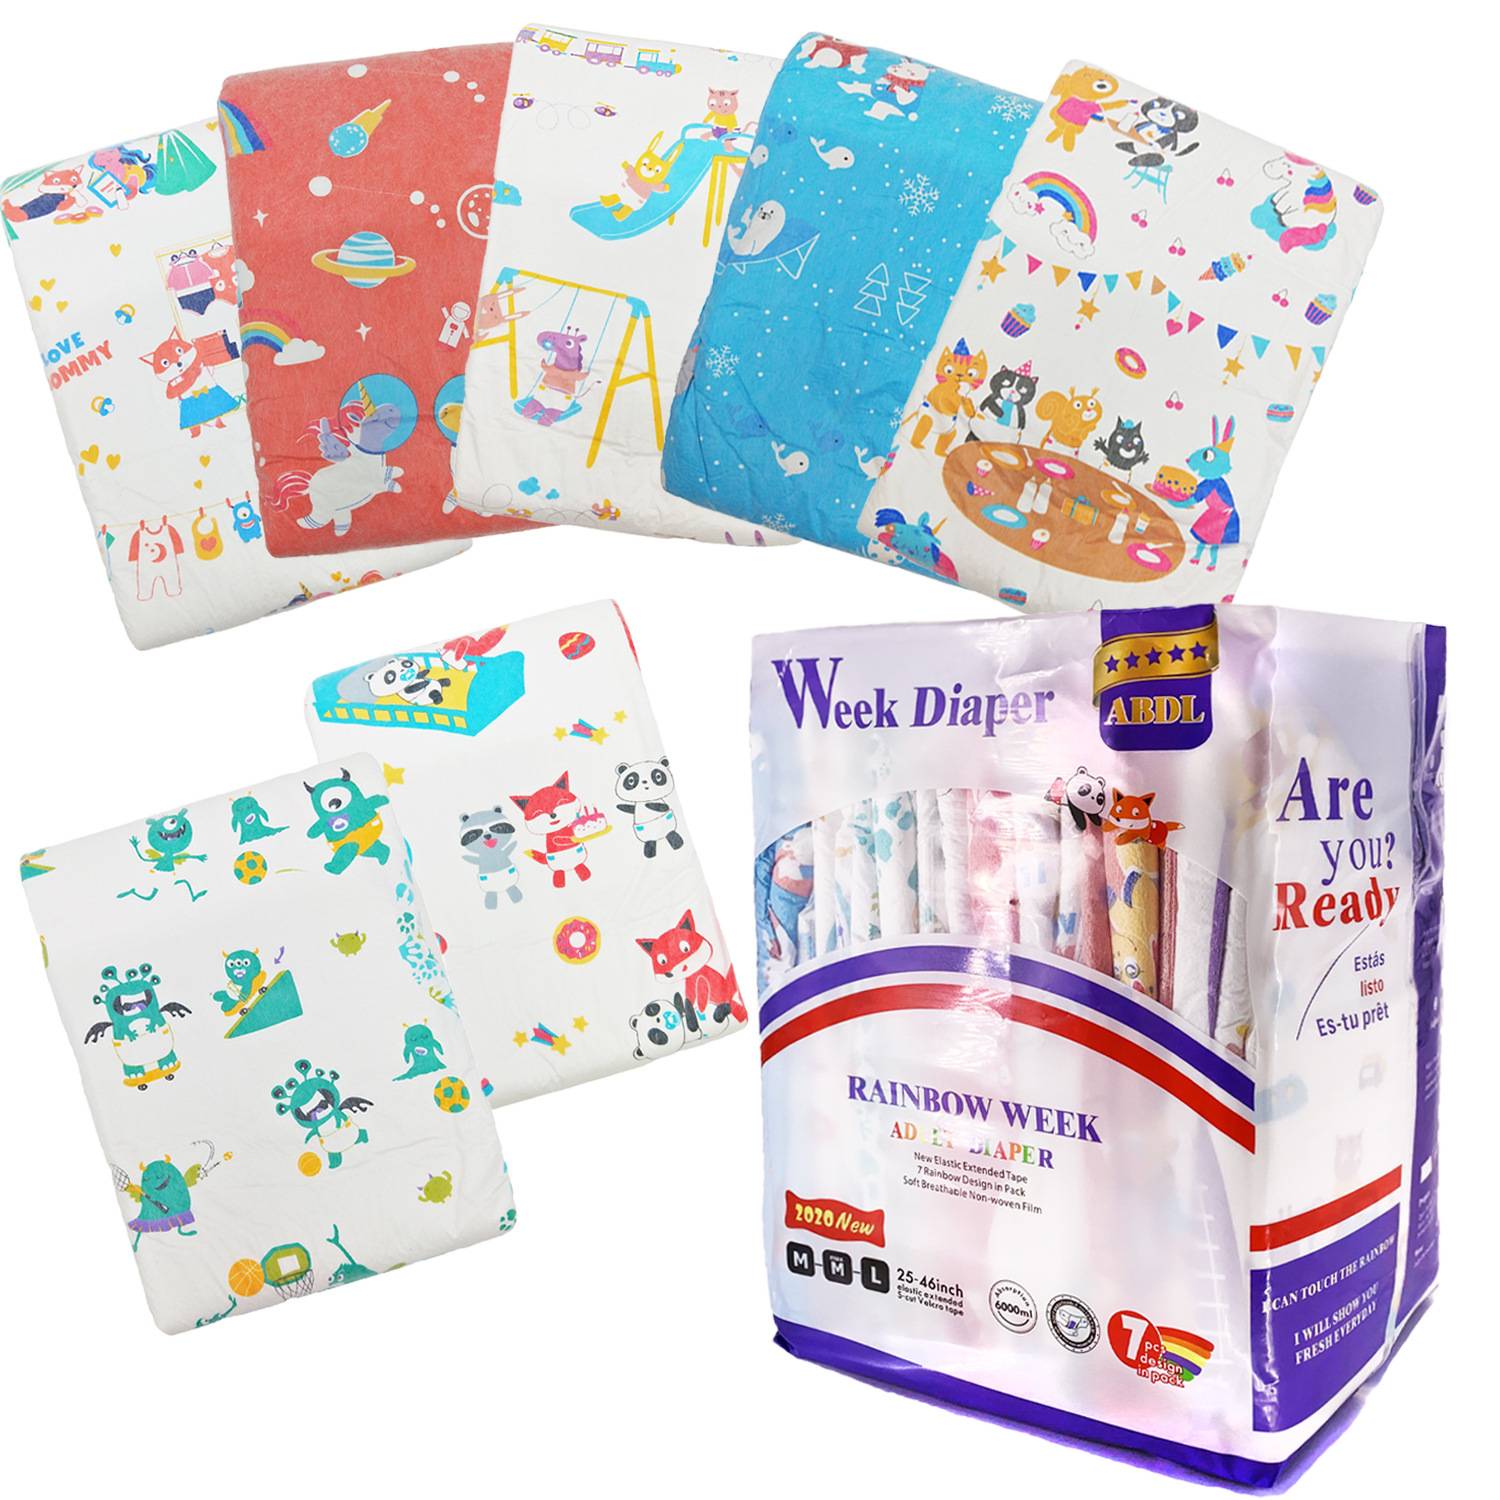 New Fashion Design for Buy Adult Diapers Online - ABDL Thick Diaper – Yoho